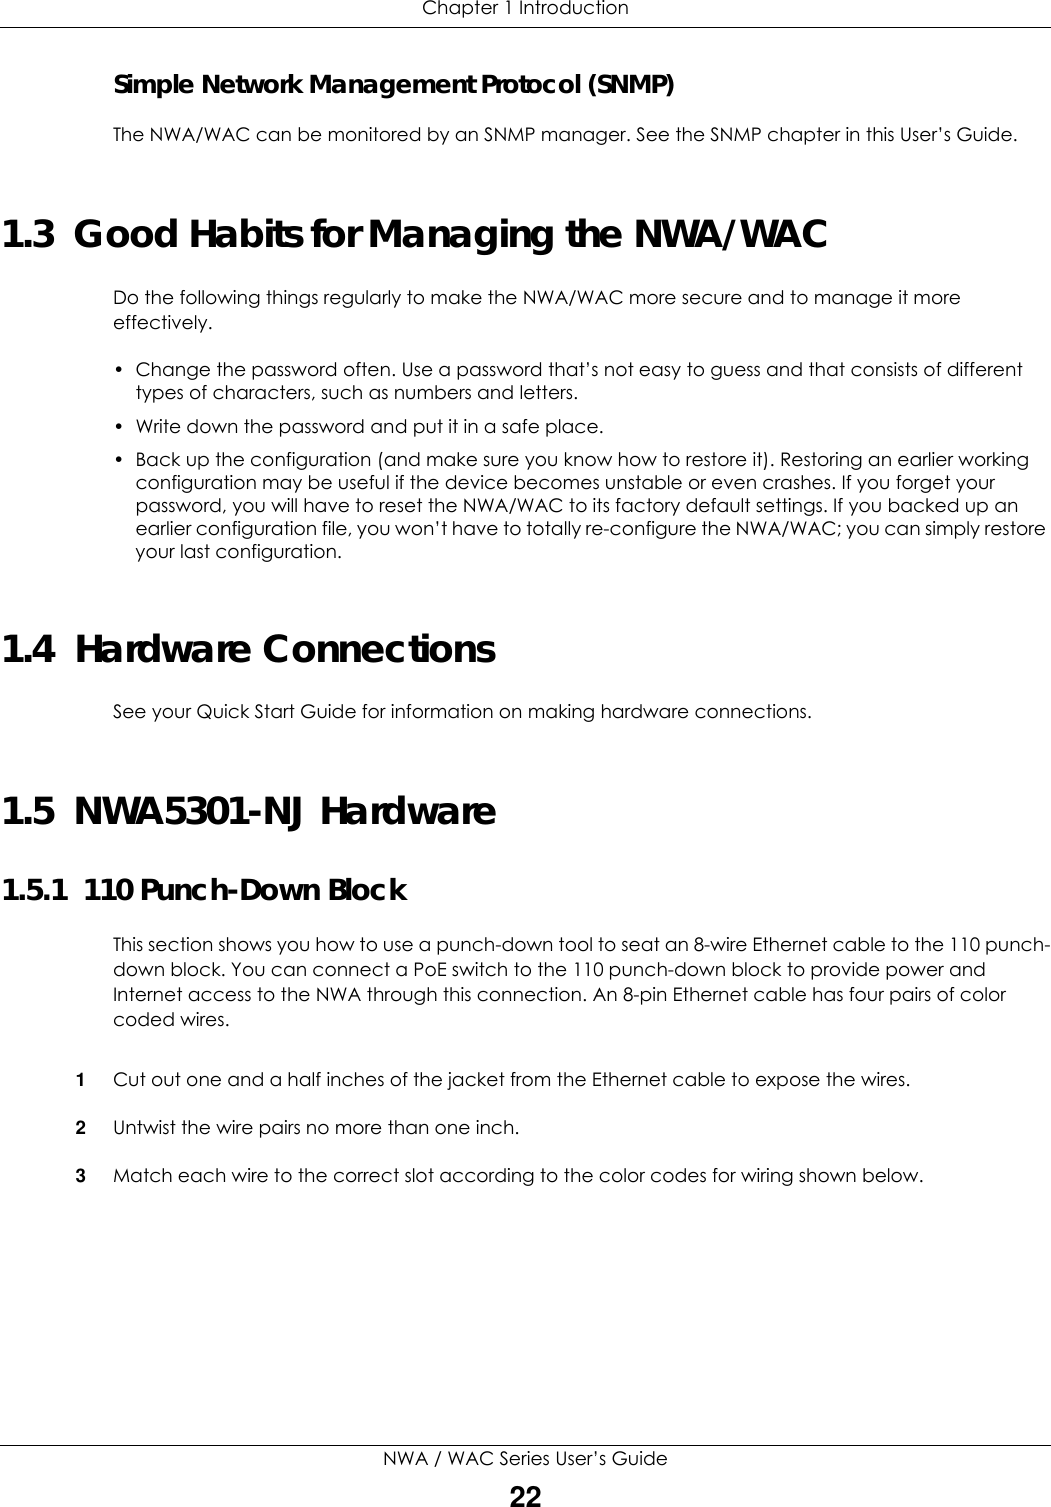 Chapter 1 IntroductionNWA / WAC Series User’s Guide22Simple Network Management Protocol (SNMP)The NWA/WAC can be monitored by an SNMP manager. See the SNMP chapter in this User’s Guide.1.3  Good Habits for Managing the NWA/WACDo the following things regularly to make the NWA/WAC more secure and to manage it more effectively.• Change the password often. Use a password that’s not easy to guess and that consists of different types of characters, such as numbers and letters.• Write down the password and put it in a safe place.• Back up the configuration (and make sure you know how to restore it). Restoring an earlier working configuration may be useful if the device becomes unstable or even crashes. If you forget your password, you will have to reset the NWA/WAC to its factory default settings. If you backed up an earlier configuration file, you won’t have to totally re-configure the NWA/WAC; you can simply restore your last configuration.1.4  Hardware ConnectionsSee your Quick Start Guide for information on making hardware connections.1.5  NWA5301-NJ Hardware1.5.1  110 Punch-Down BlockThis section shows you how to use a punch-down tool to seat an 8-wire Ethernet cable to the 110 punch-down block. You can connect a PoE switch to the 110 punch-down block to provide power and Internet access to the NWA through this connection. An 8-pin Ethernet cable has four pairs of color coded wires.1Cut out one and a half inches of the jacket from the Ethernet cable to expose the wires. 2Untwist the wire pairs no more than one inch.3Match each wire to the correct slot according to the color codes for wiring shown below. 